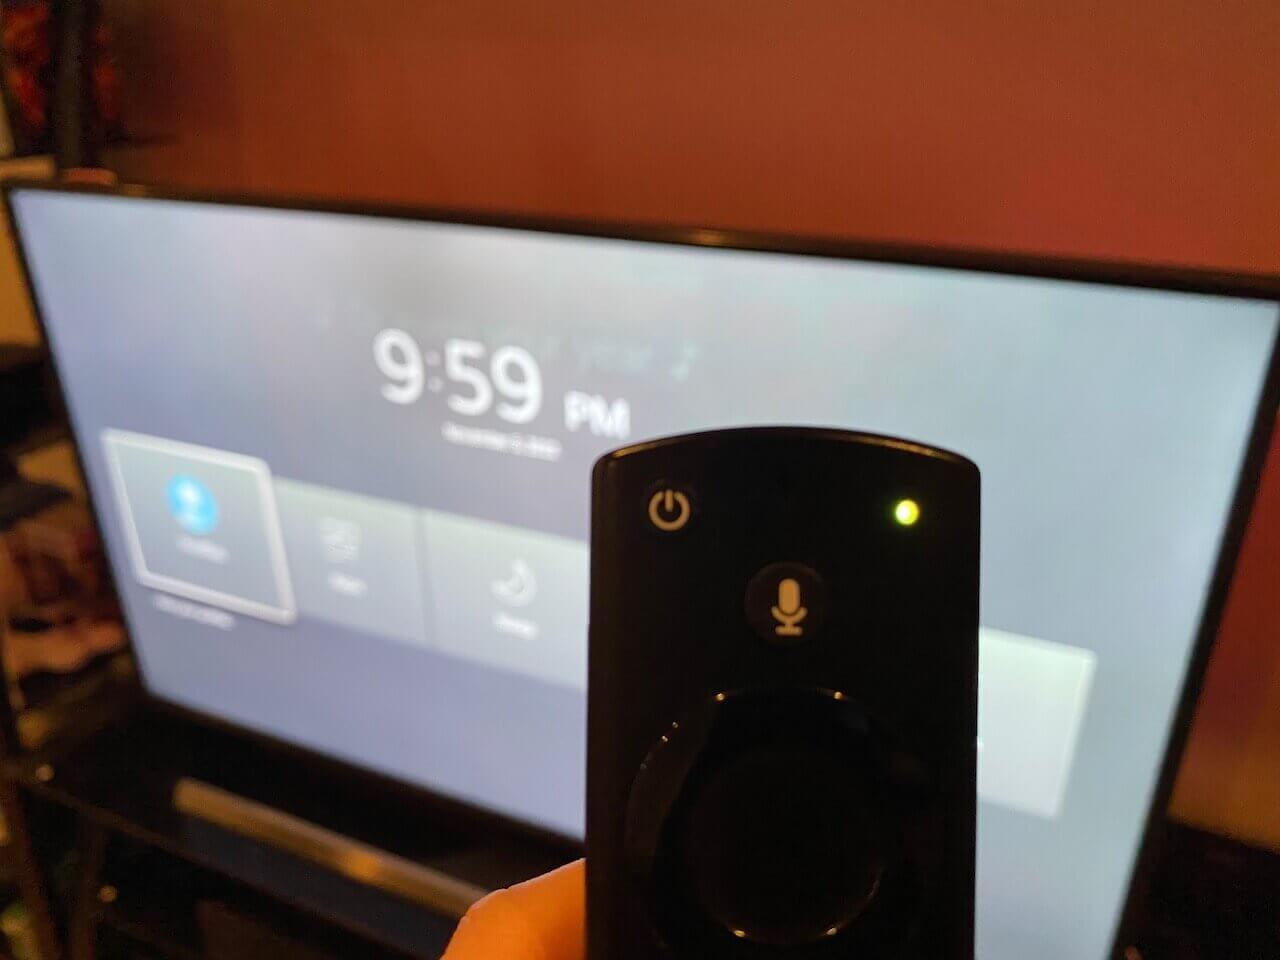 The Fire TV remote with its Alexa button that lets you issue voice commands